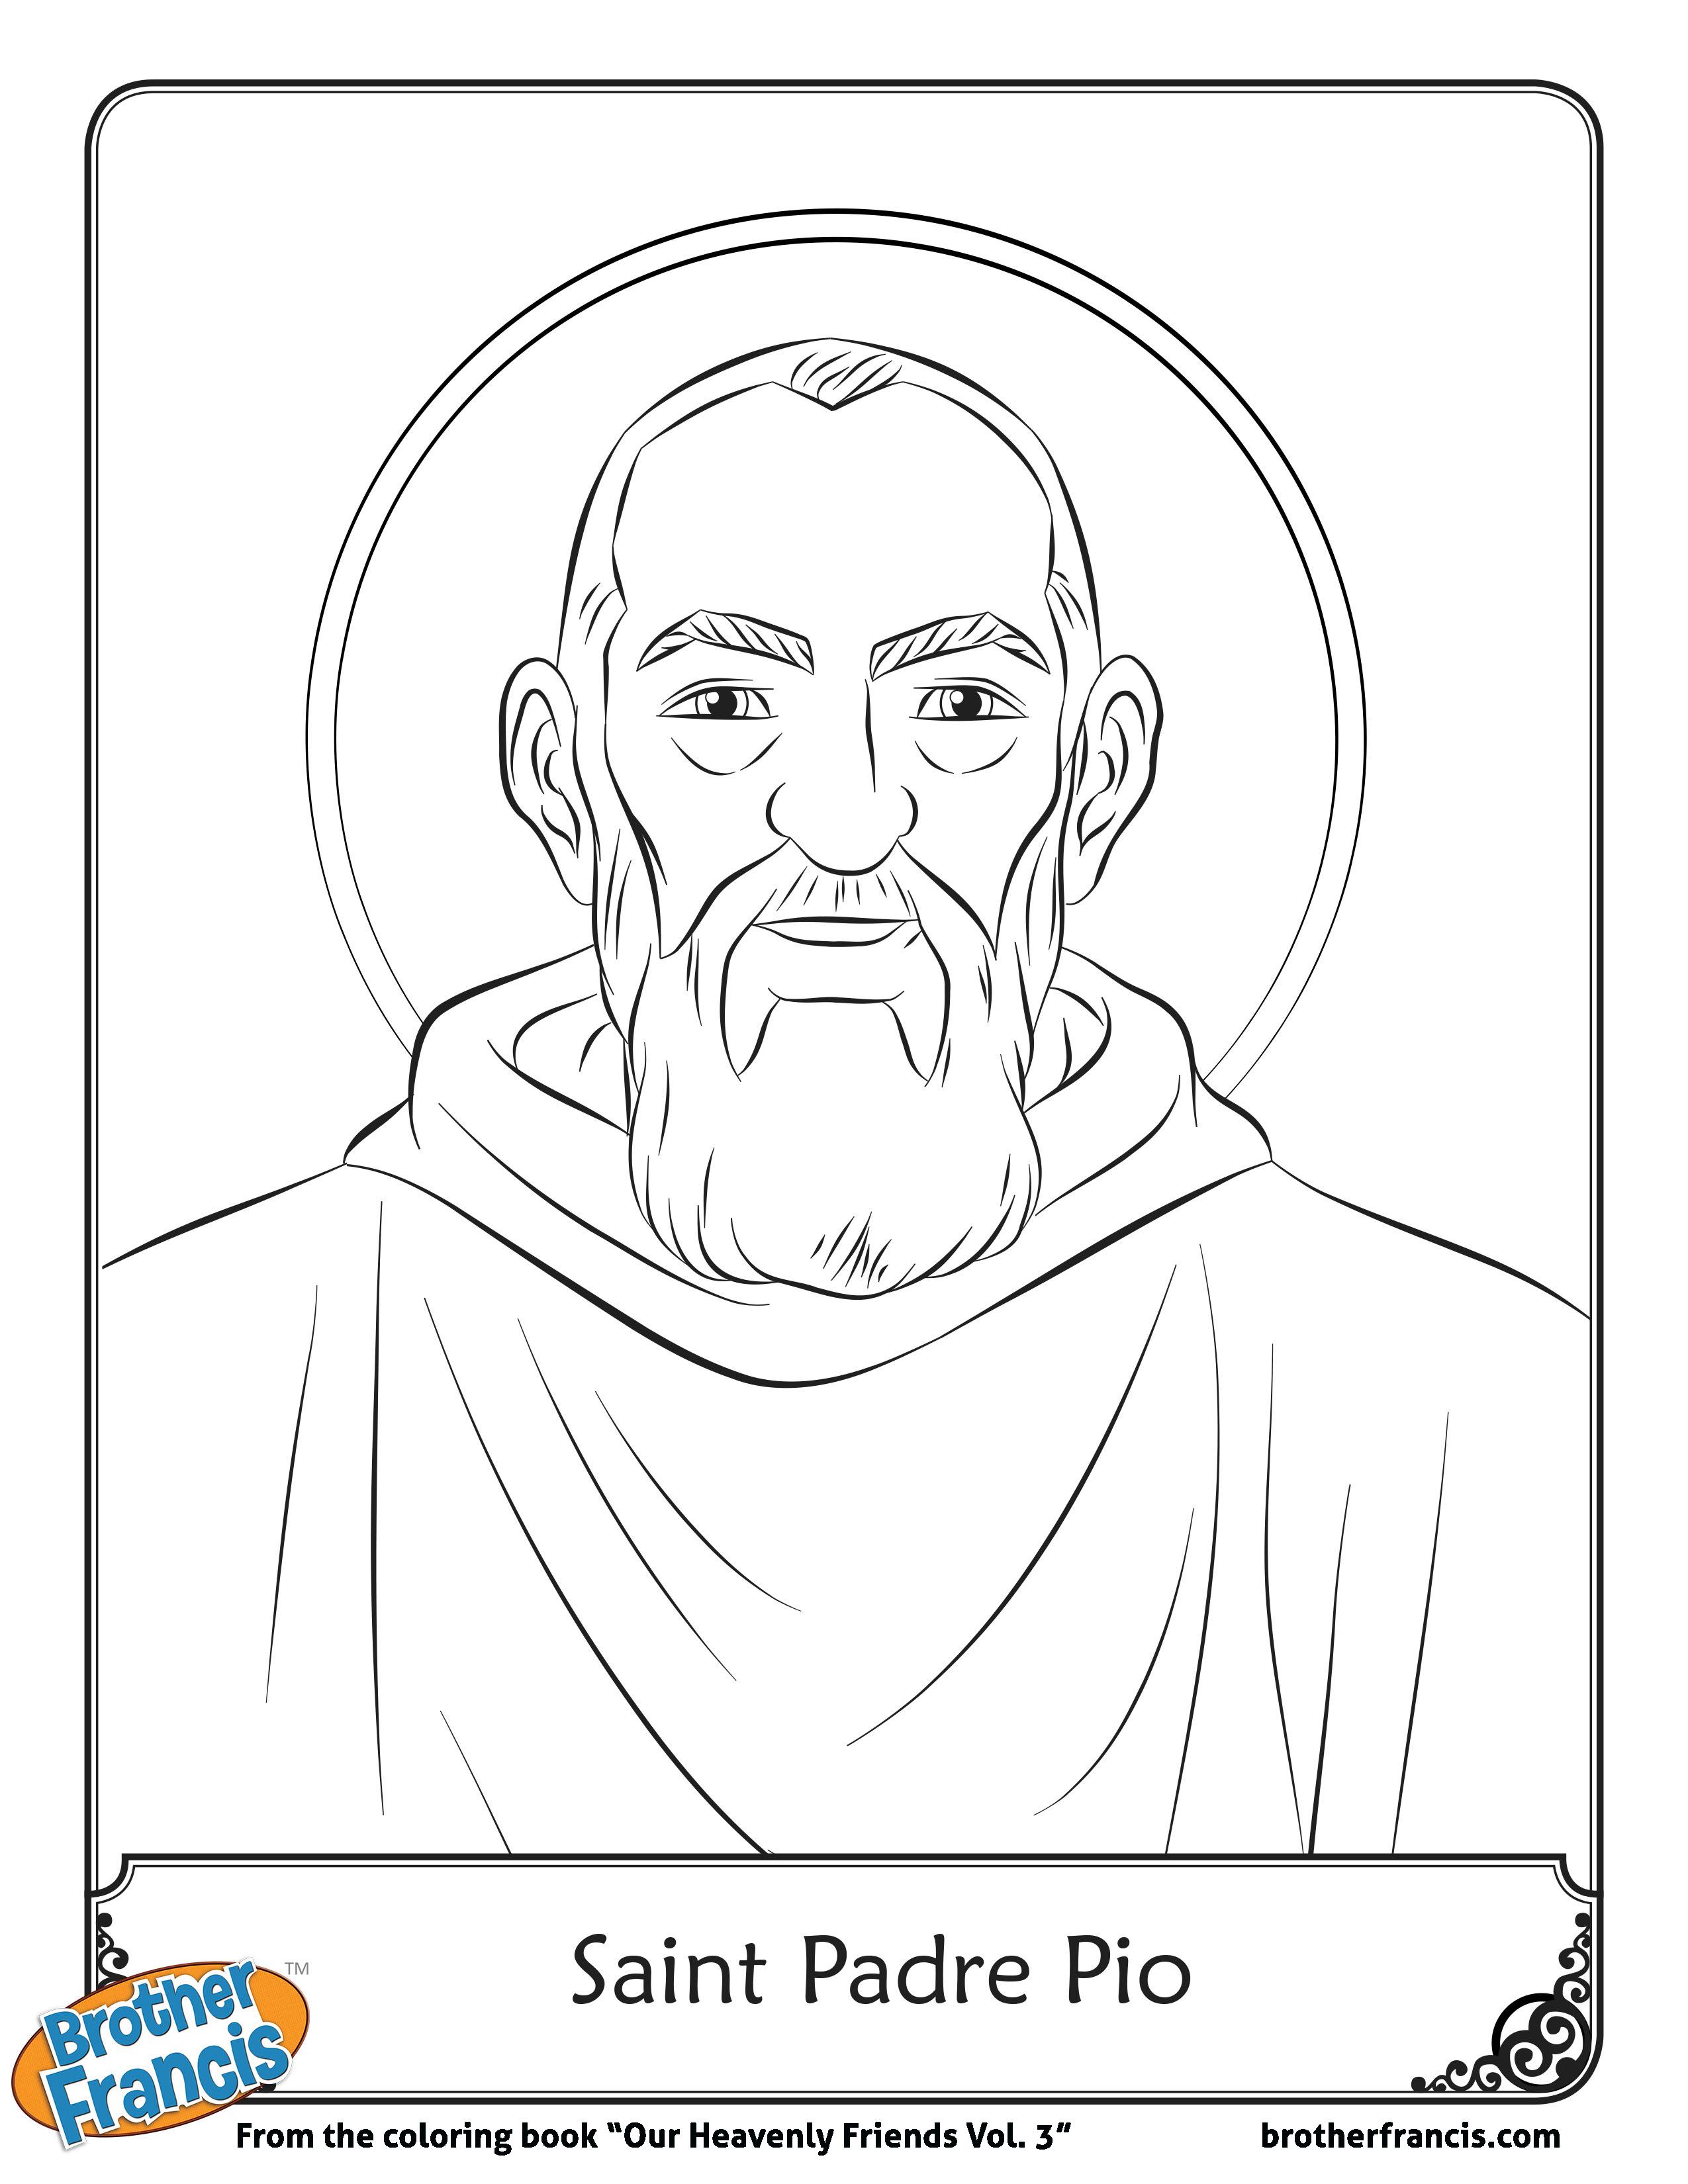 September 23_Saint-padre-pio-free-coloring-page-page-001